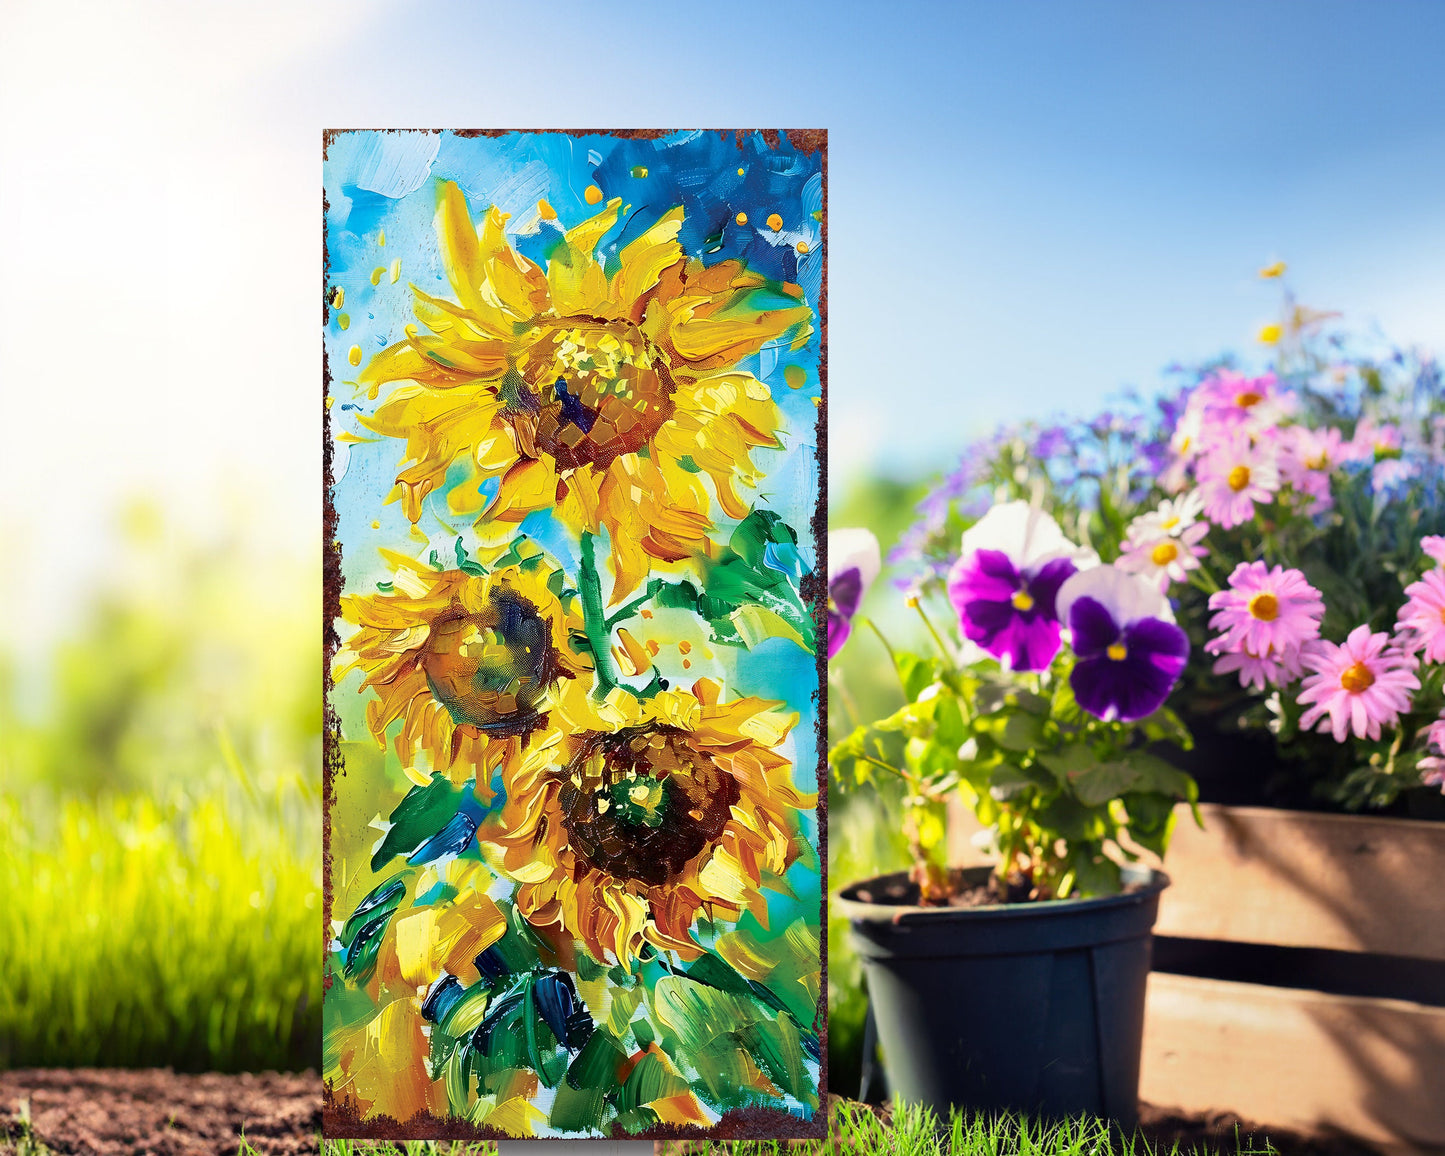 Beautiful 30in Summer Garden Stake | Oil Paint Style Sunflower Decor | Great for Outdoor Decor, Yard Art, and Garden Decorations